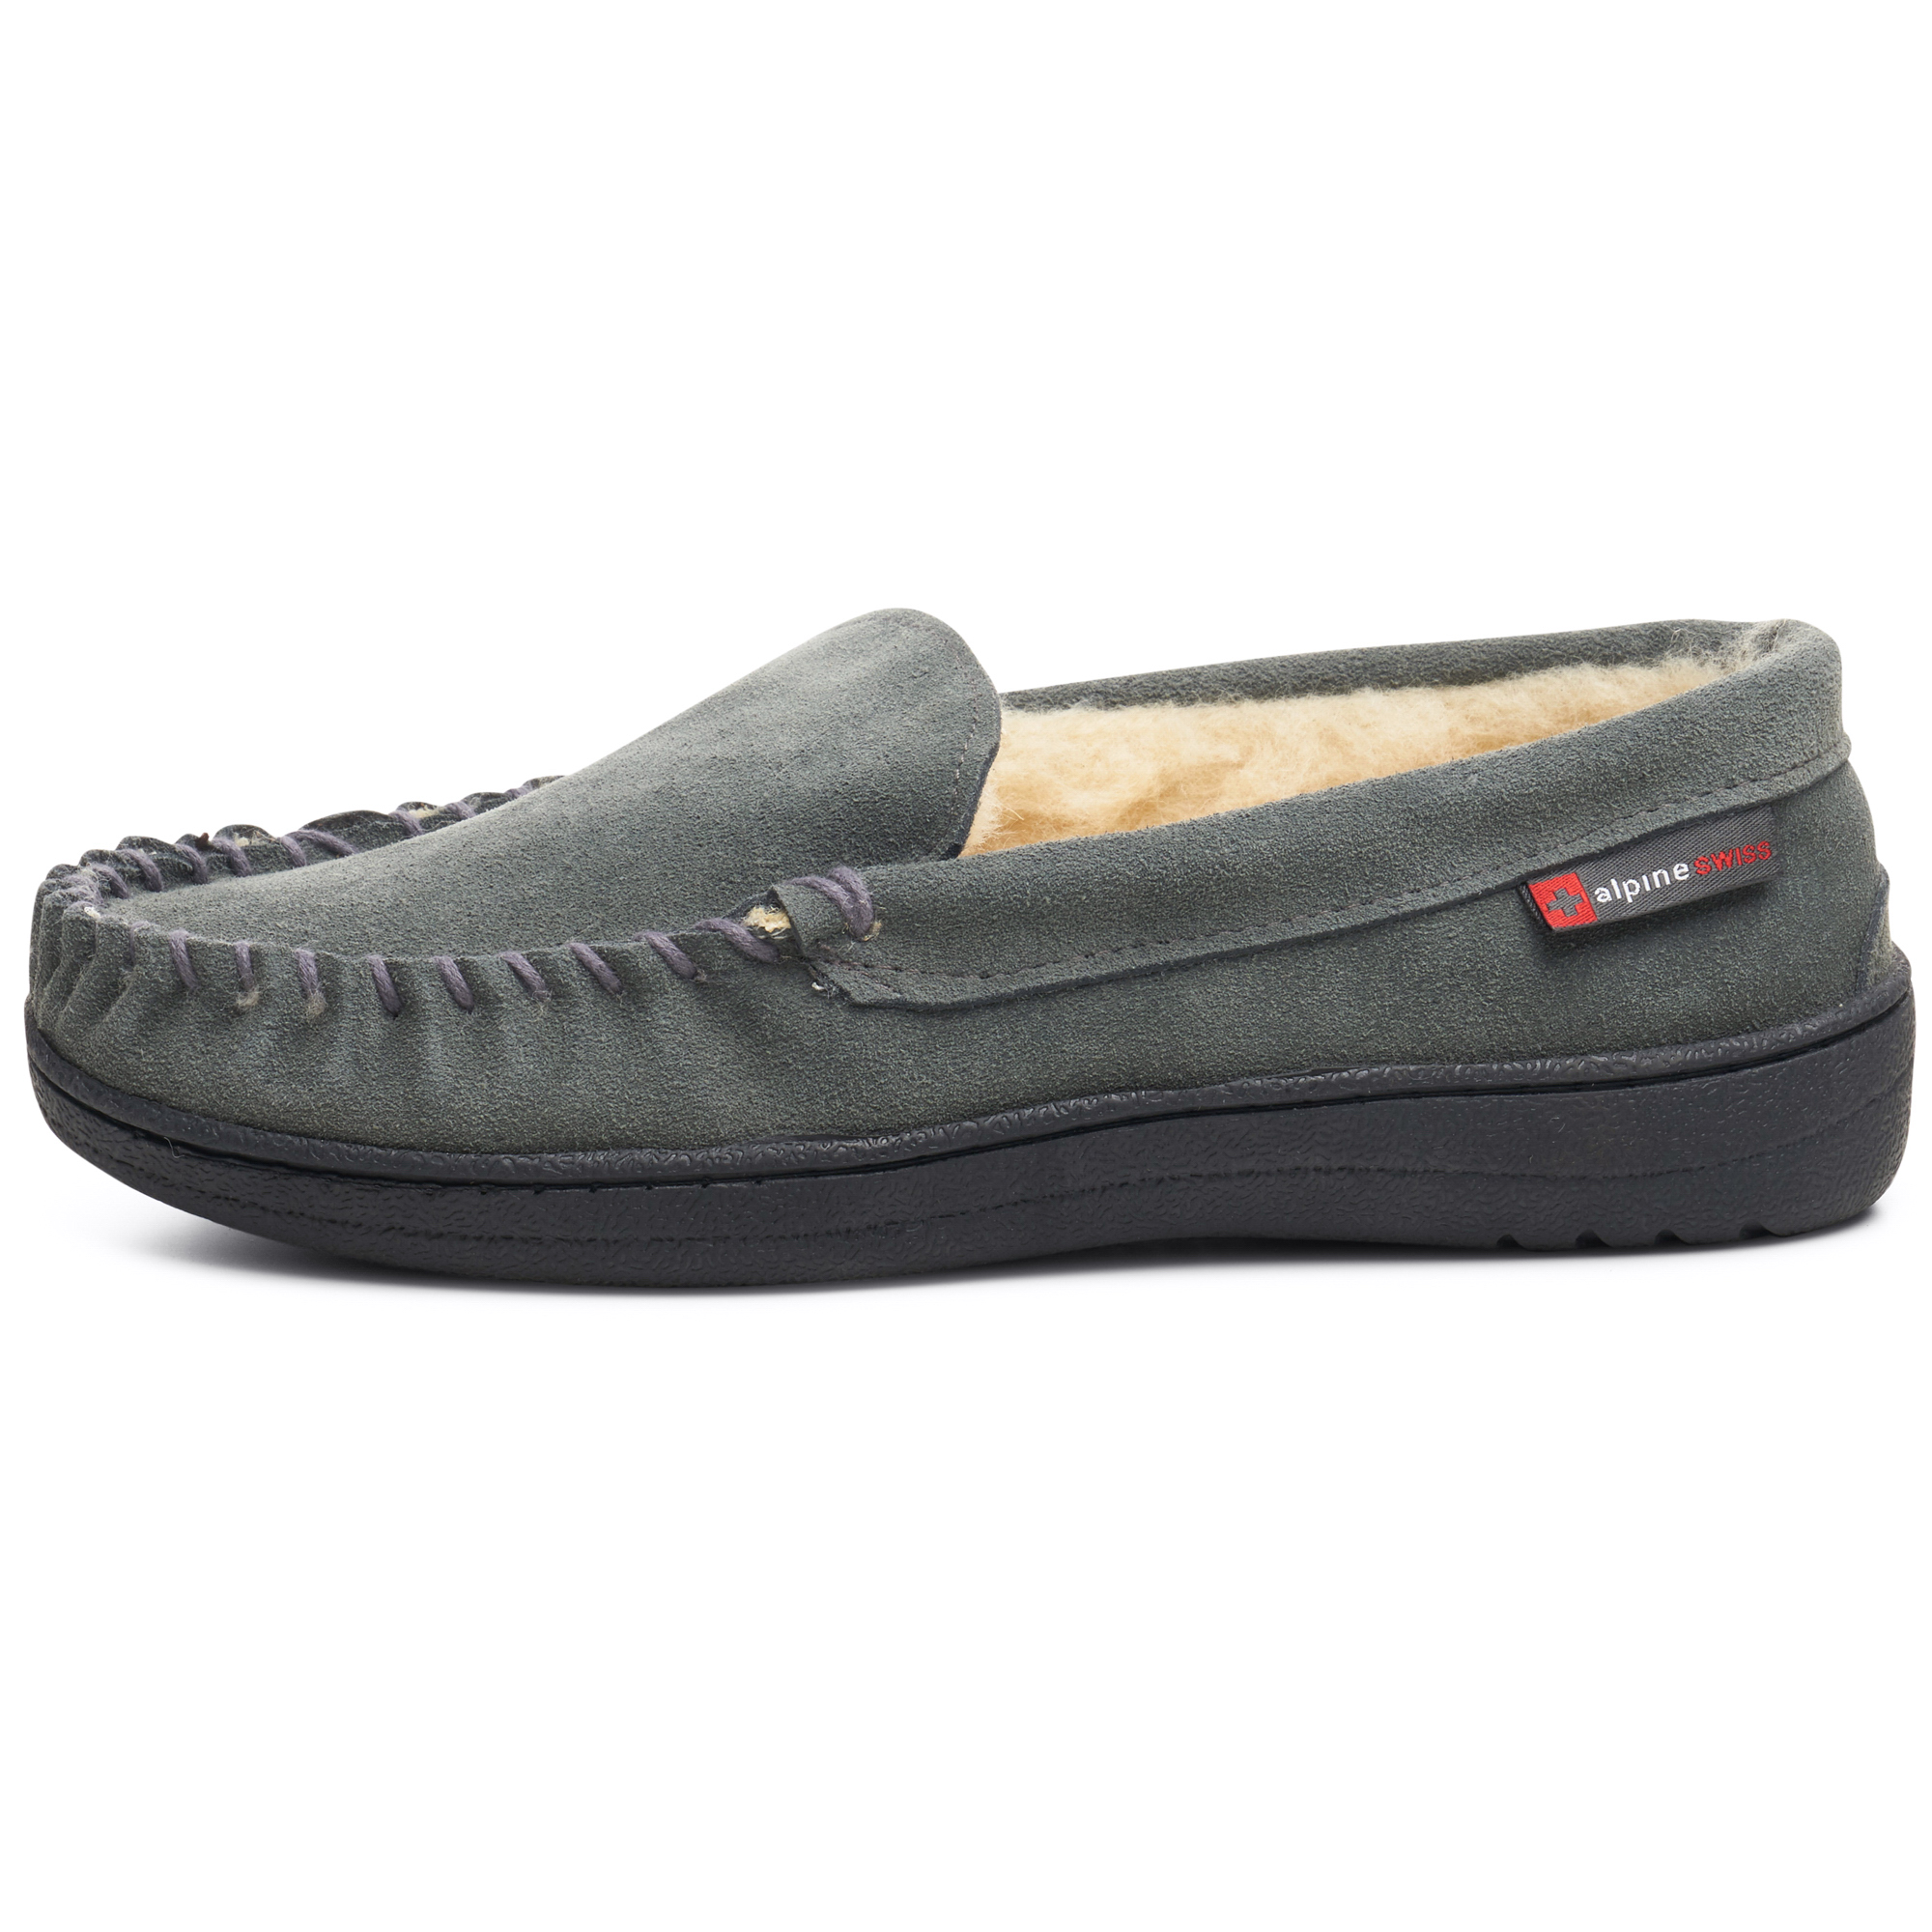 Alpine Swiss Yukon Mens Suede Shearling Moccasin Slippers Moc Toe Slip On Shoes - image 4 of 7